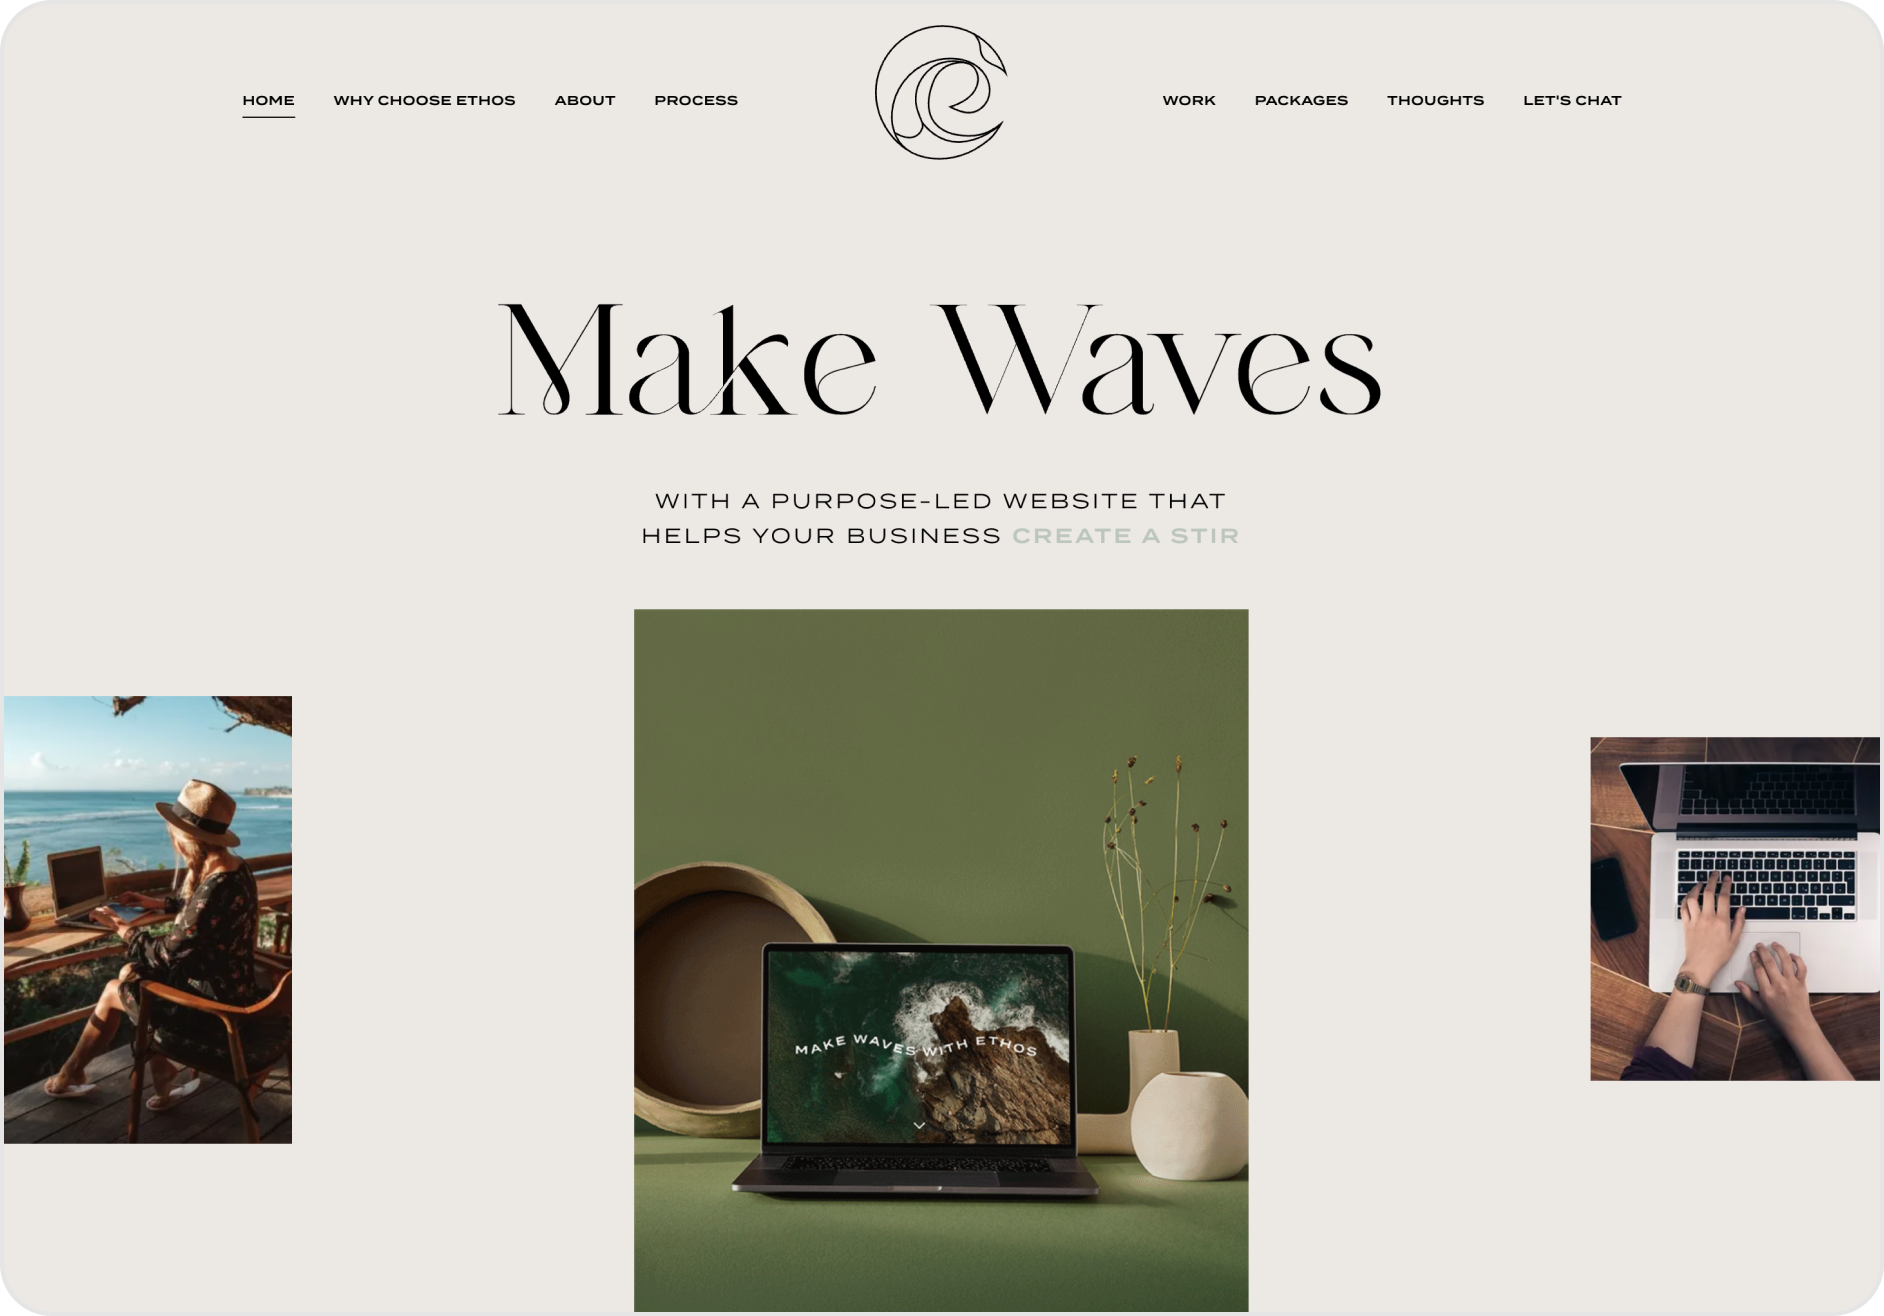 A website called make waves has a laptop on the homepage.